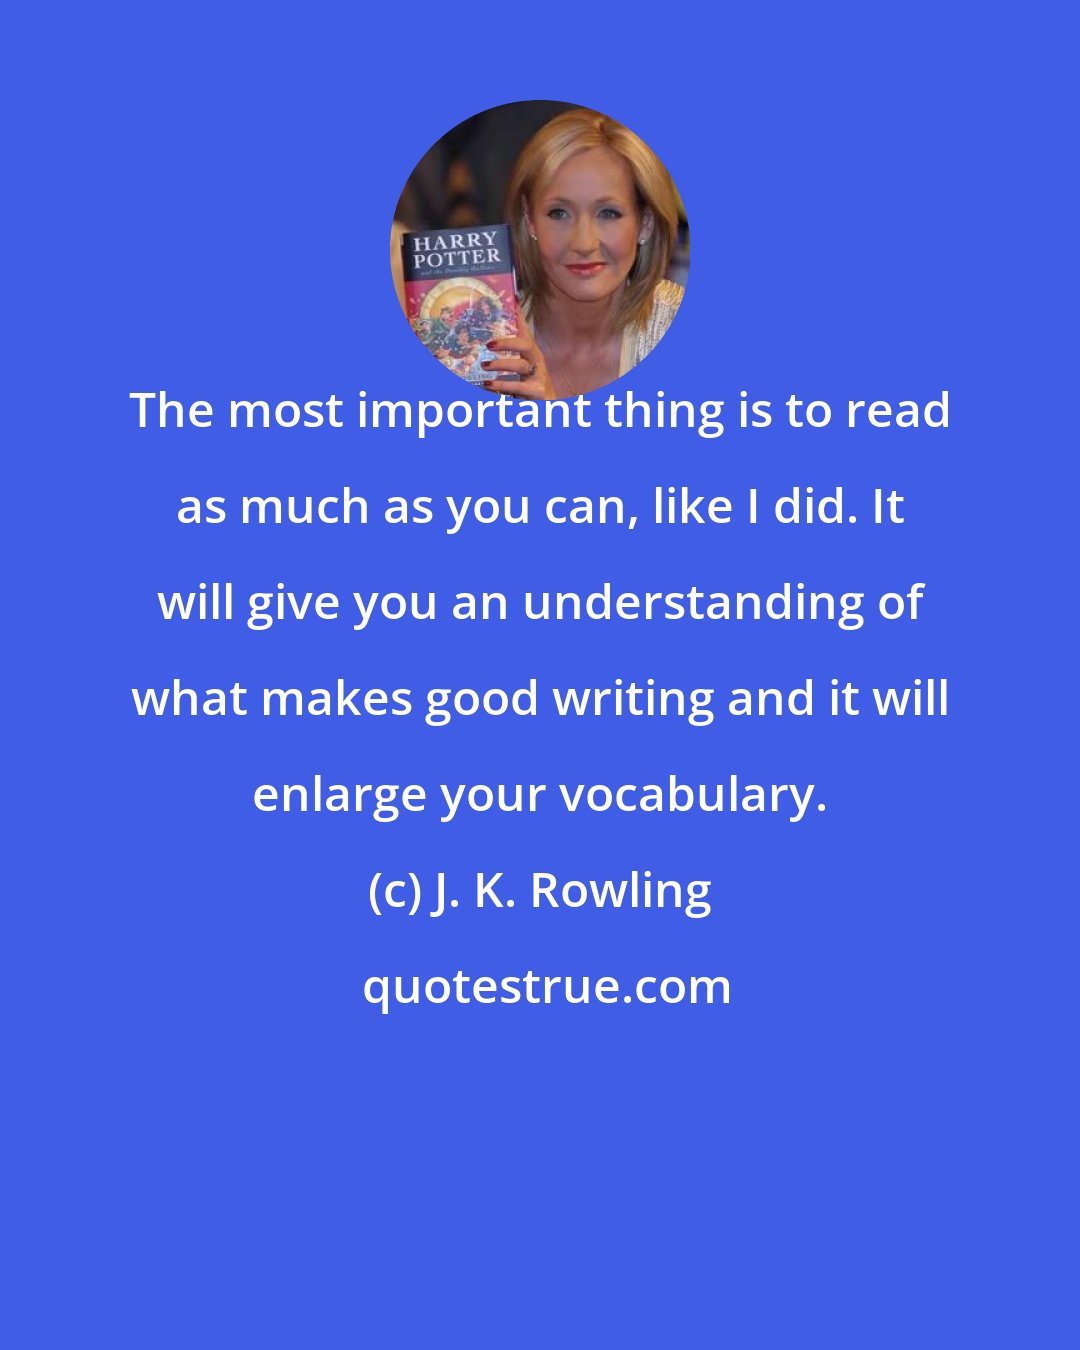 J. K. Rowling: The most important thing is to read as much as you can, like I did. It will give you an understanding of what makes good writing and it will enlarge your vocabulary.